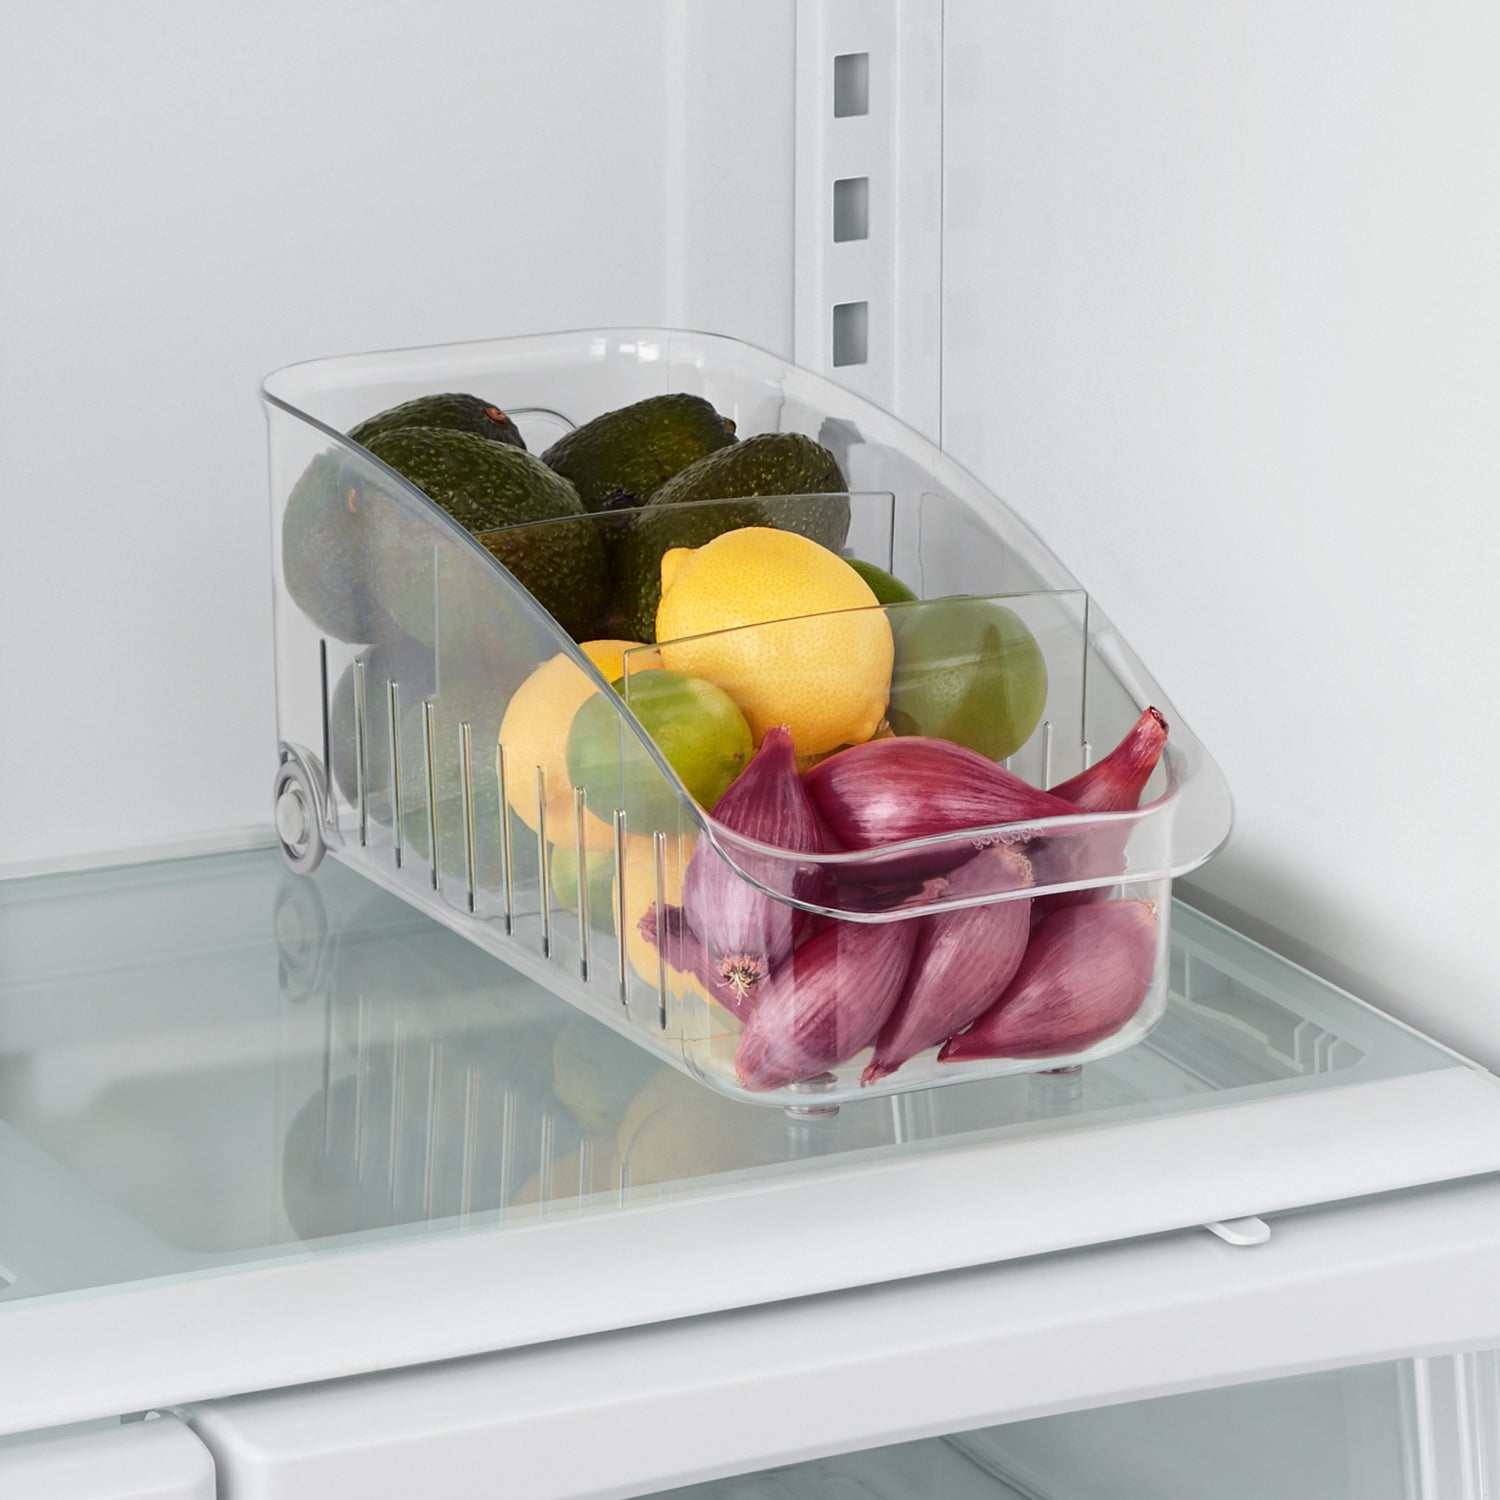  MANO 2 Pack Divided Pull Out Fridge Drawer Organizer Clear Roll  out Fridge Caddy on Wheels Refrigerator Storage Bins for Veggie Pantry  Snackle Box Under Sink Bathroom Organization: Home & Kitchen